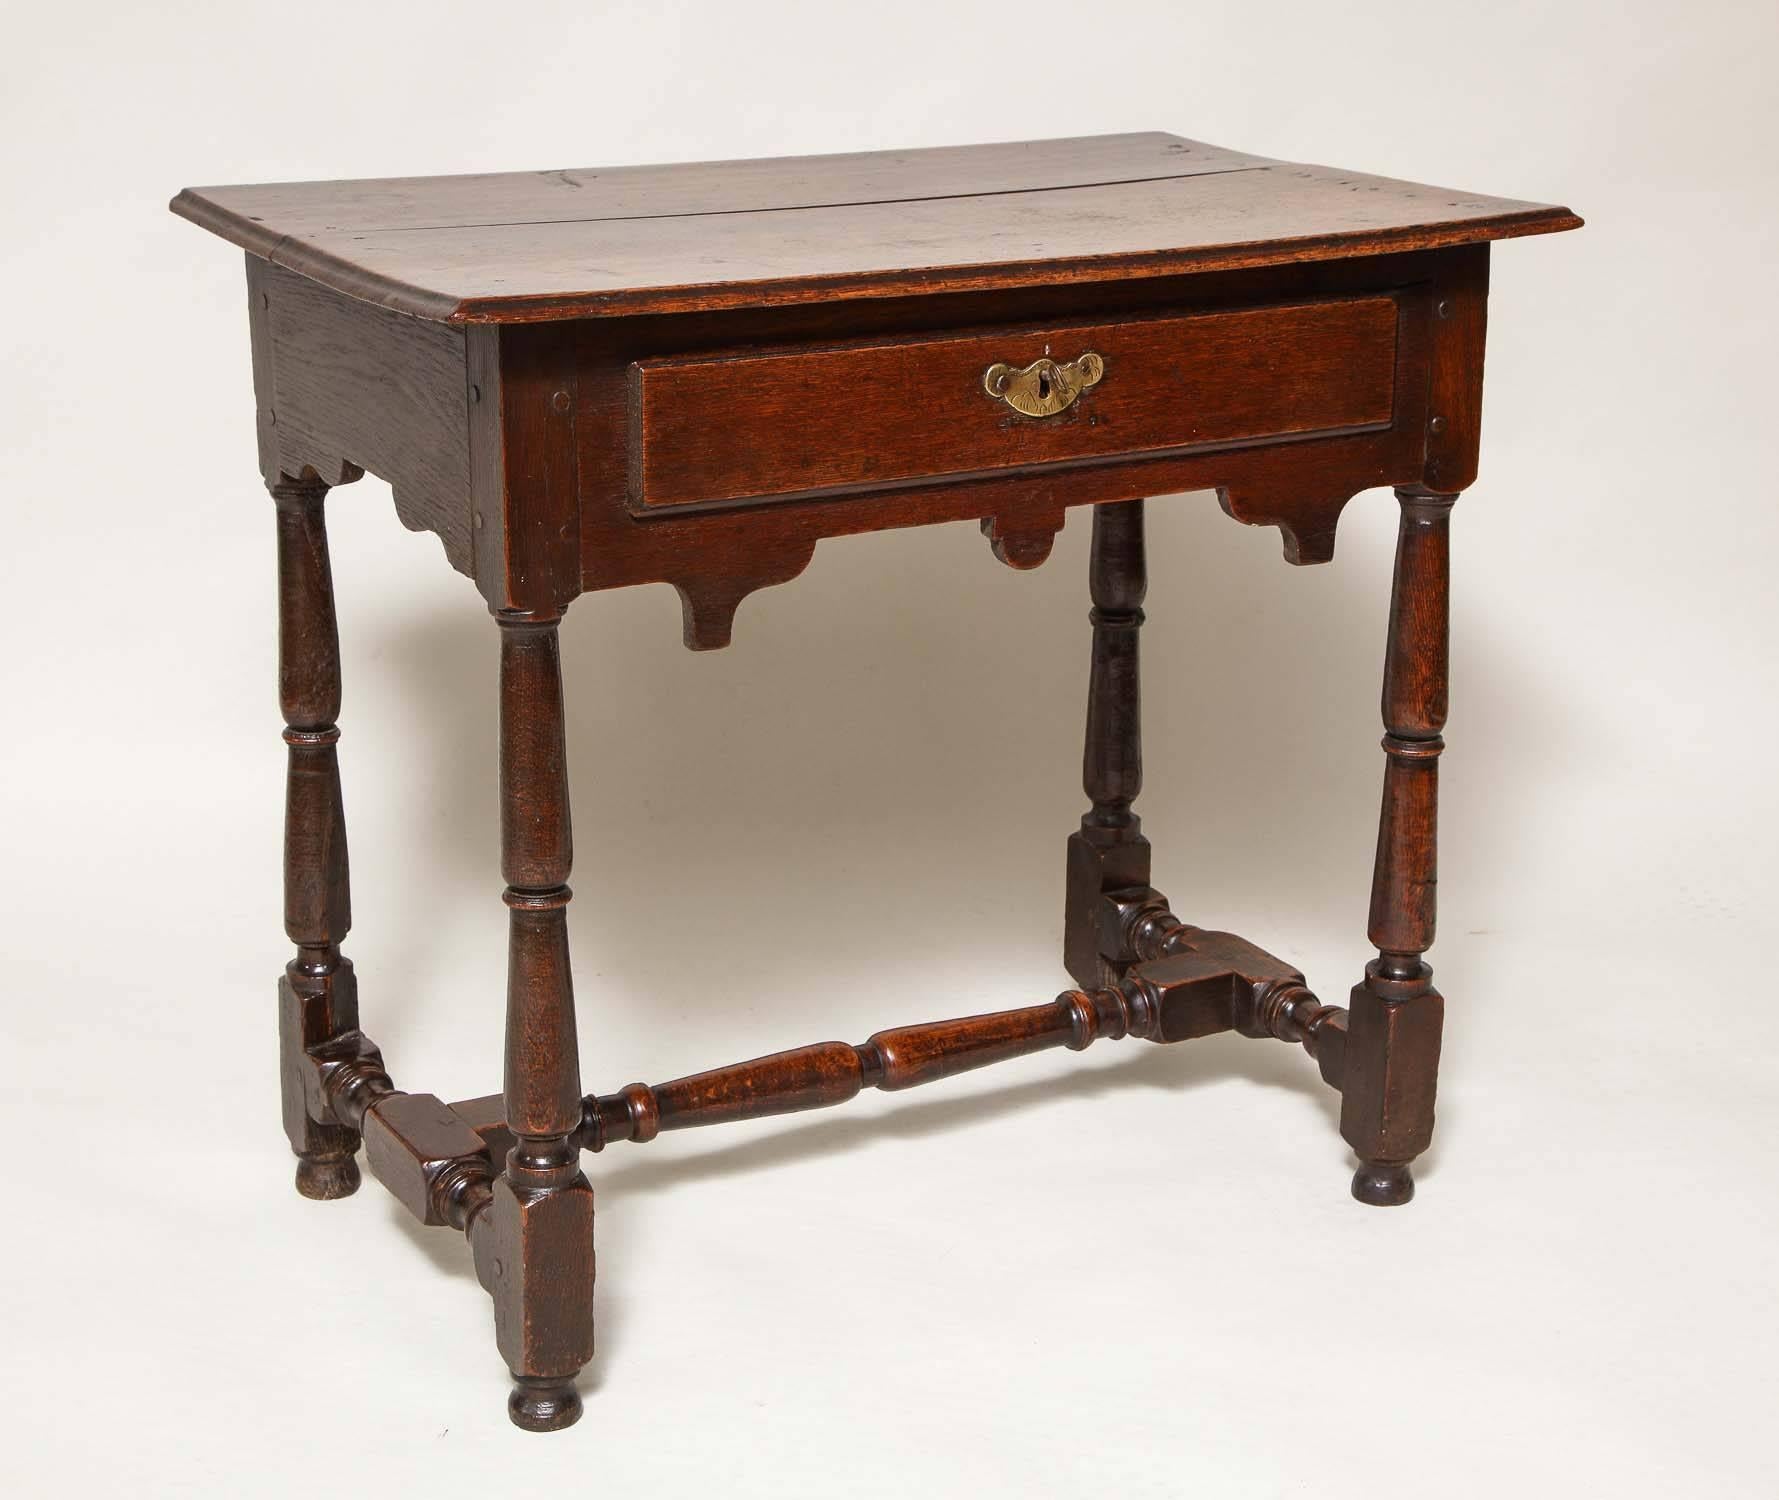 Very fine English oak side table, the richly patinated two plank top with molded edge over single drawer with original lock and etched escutcheon, over double stepped arched apron over richly turned legs joined by turned stretchers and standing on